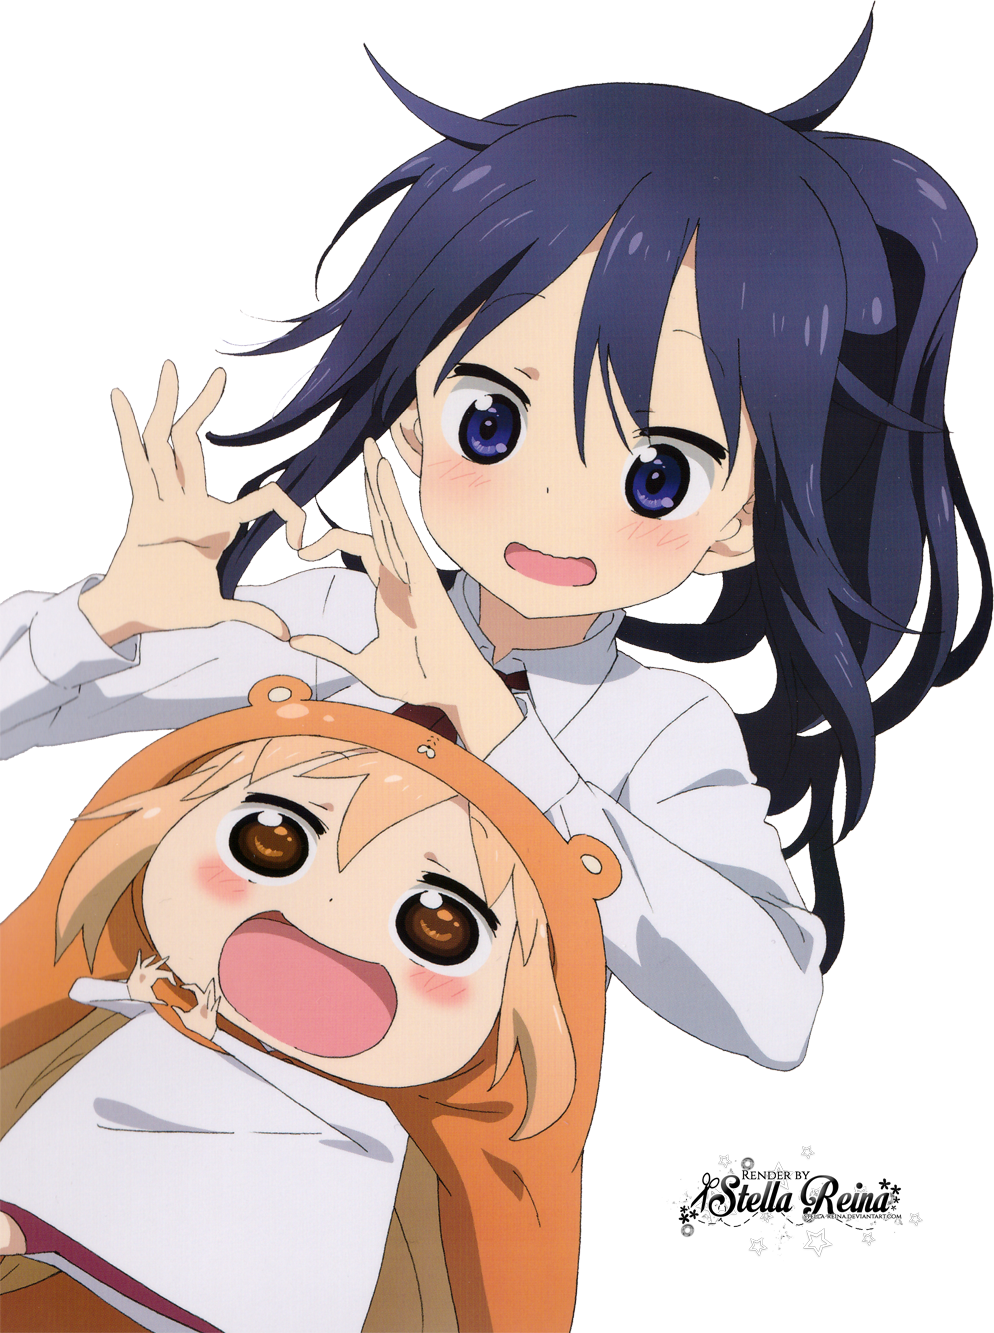 PNG File Name: Anime PlusPng.